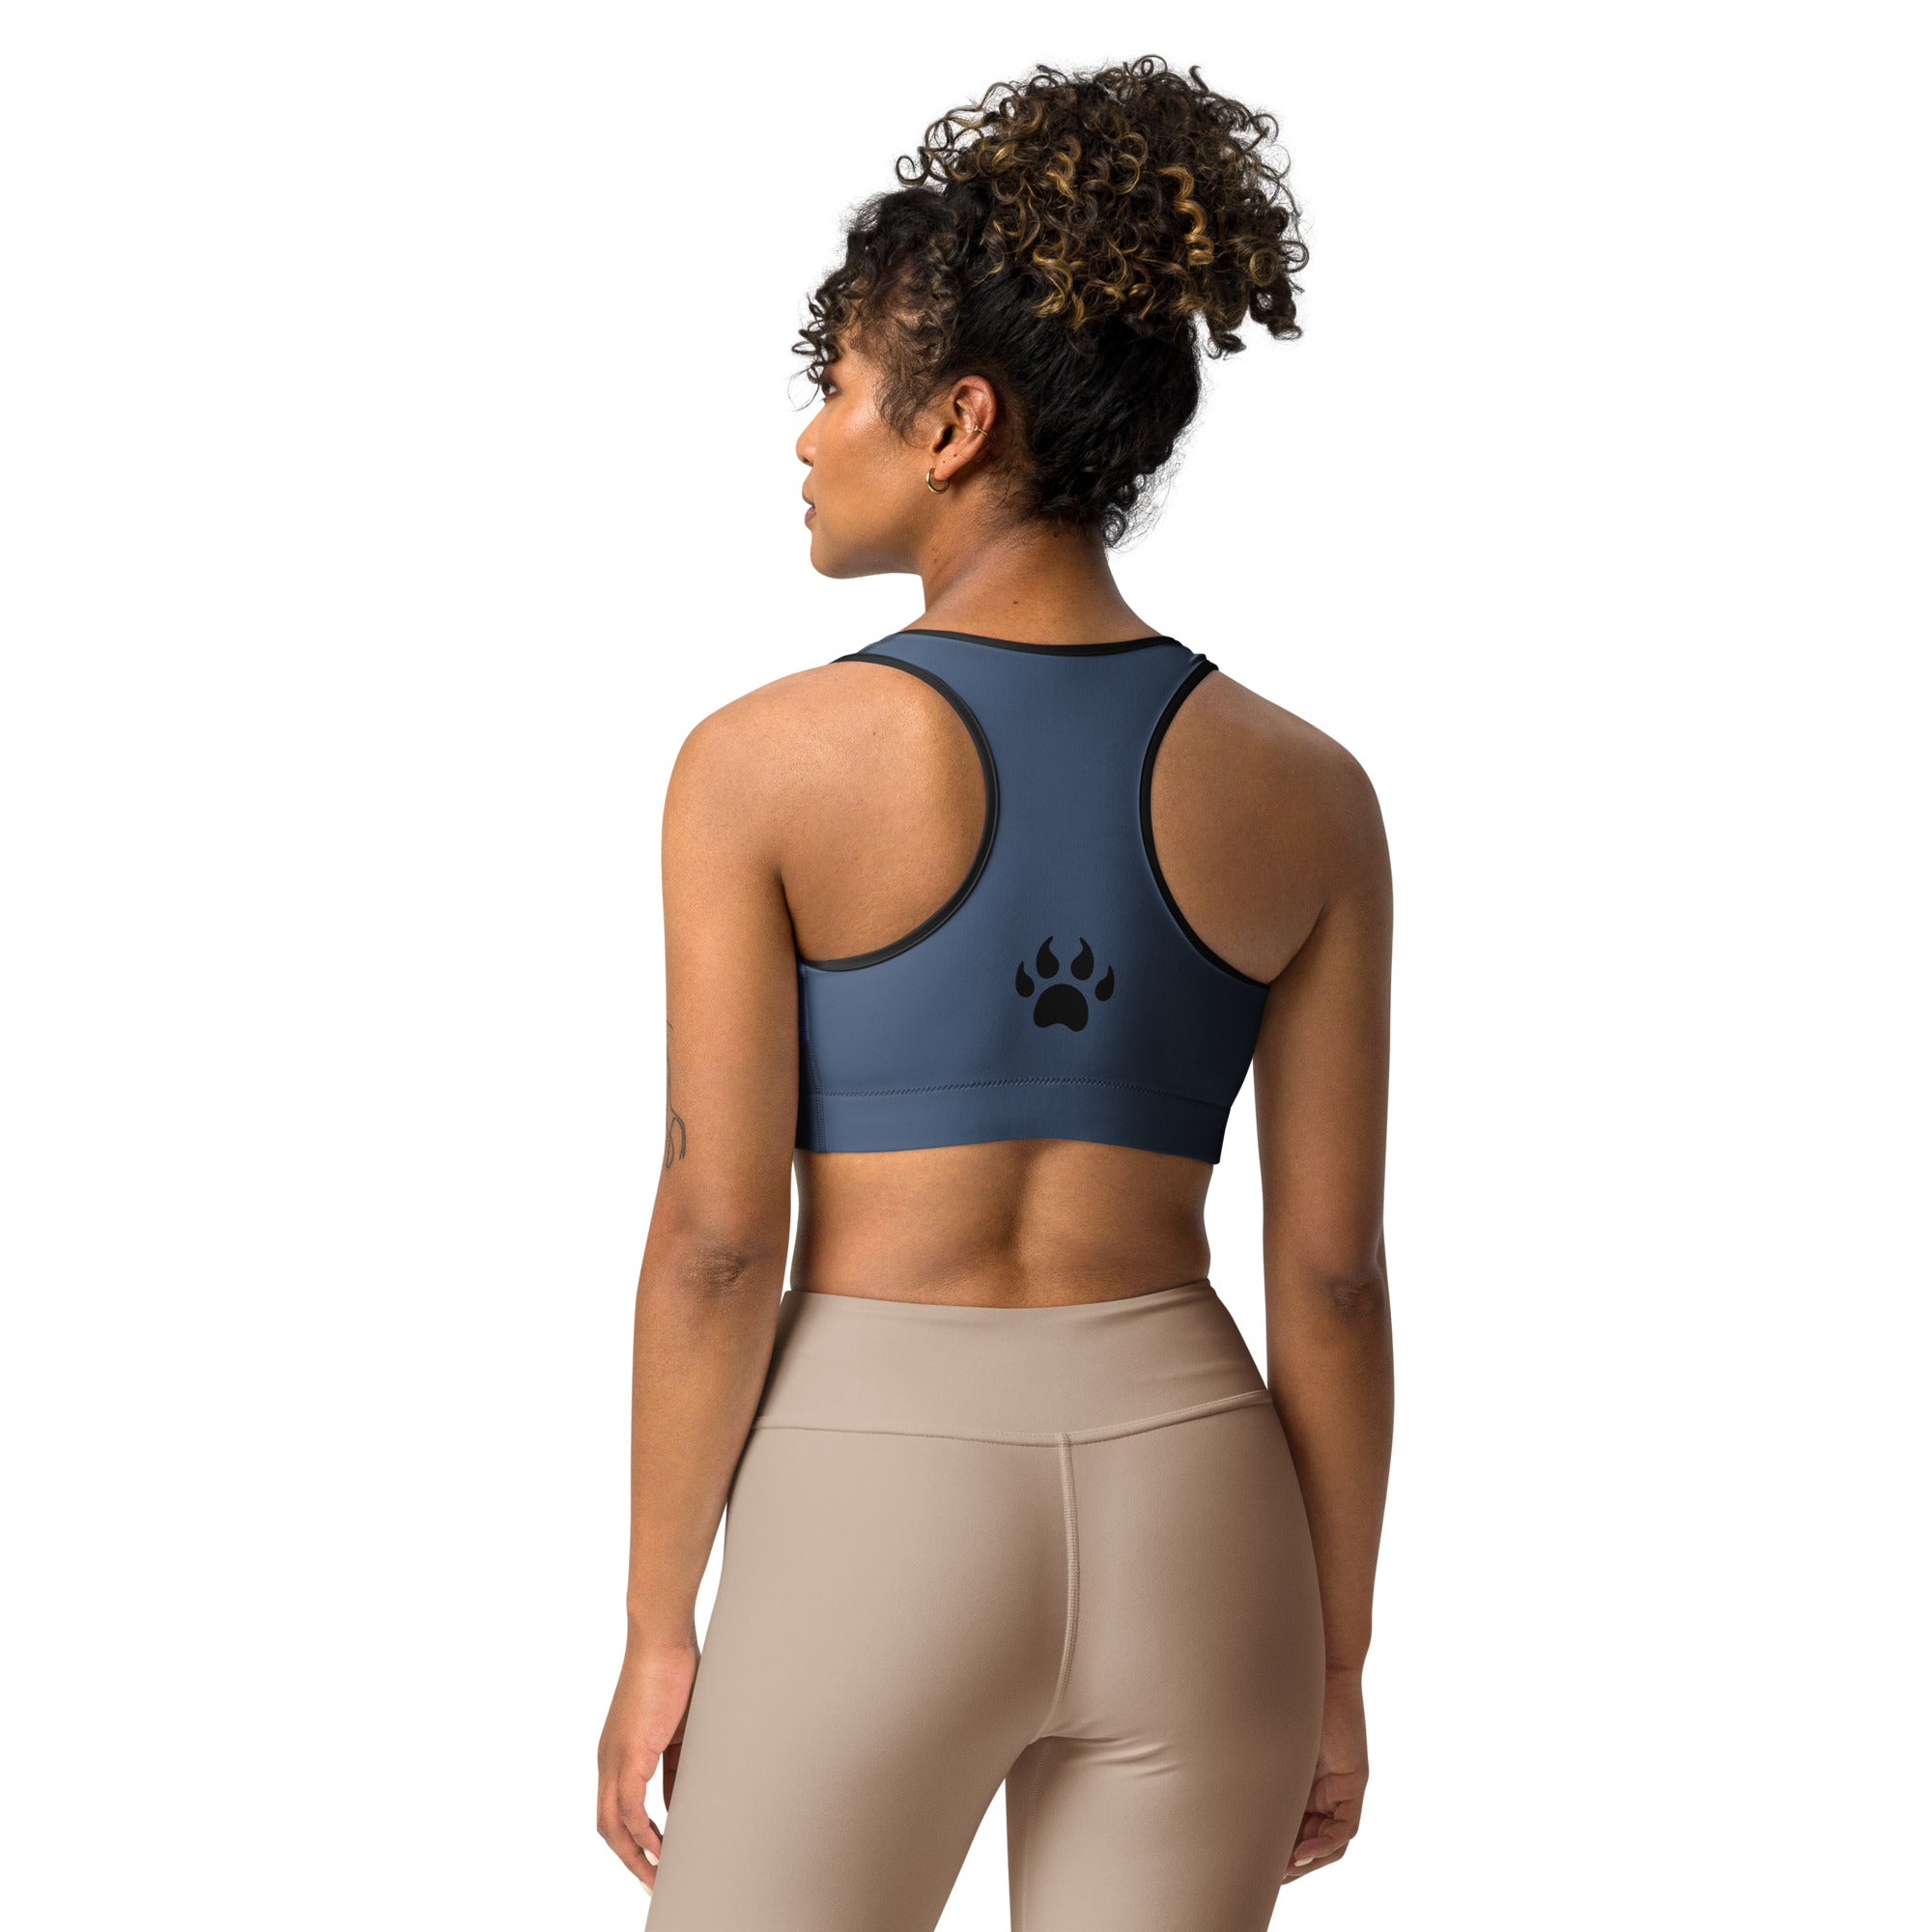 The back view of a woman wearing a blue Sweetest Paw Sports Bra Camo with paw print.